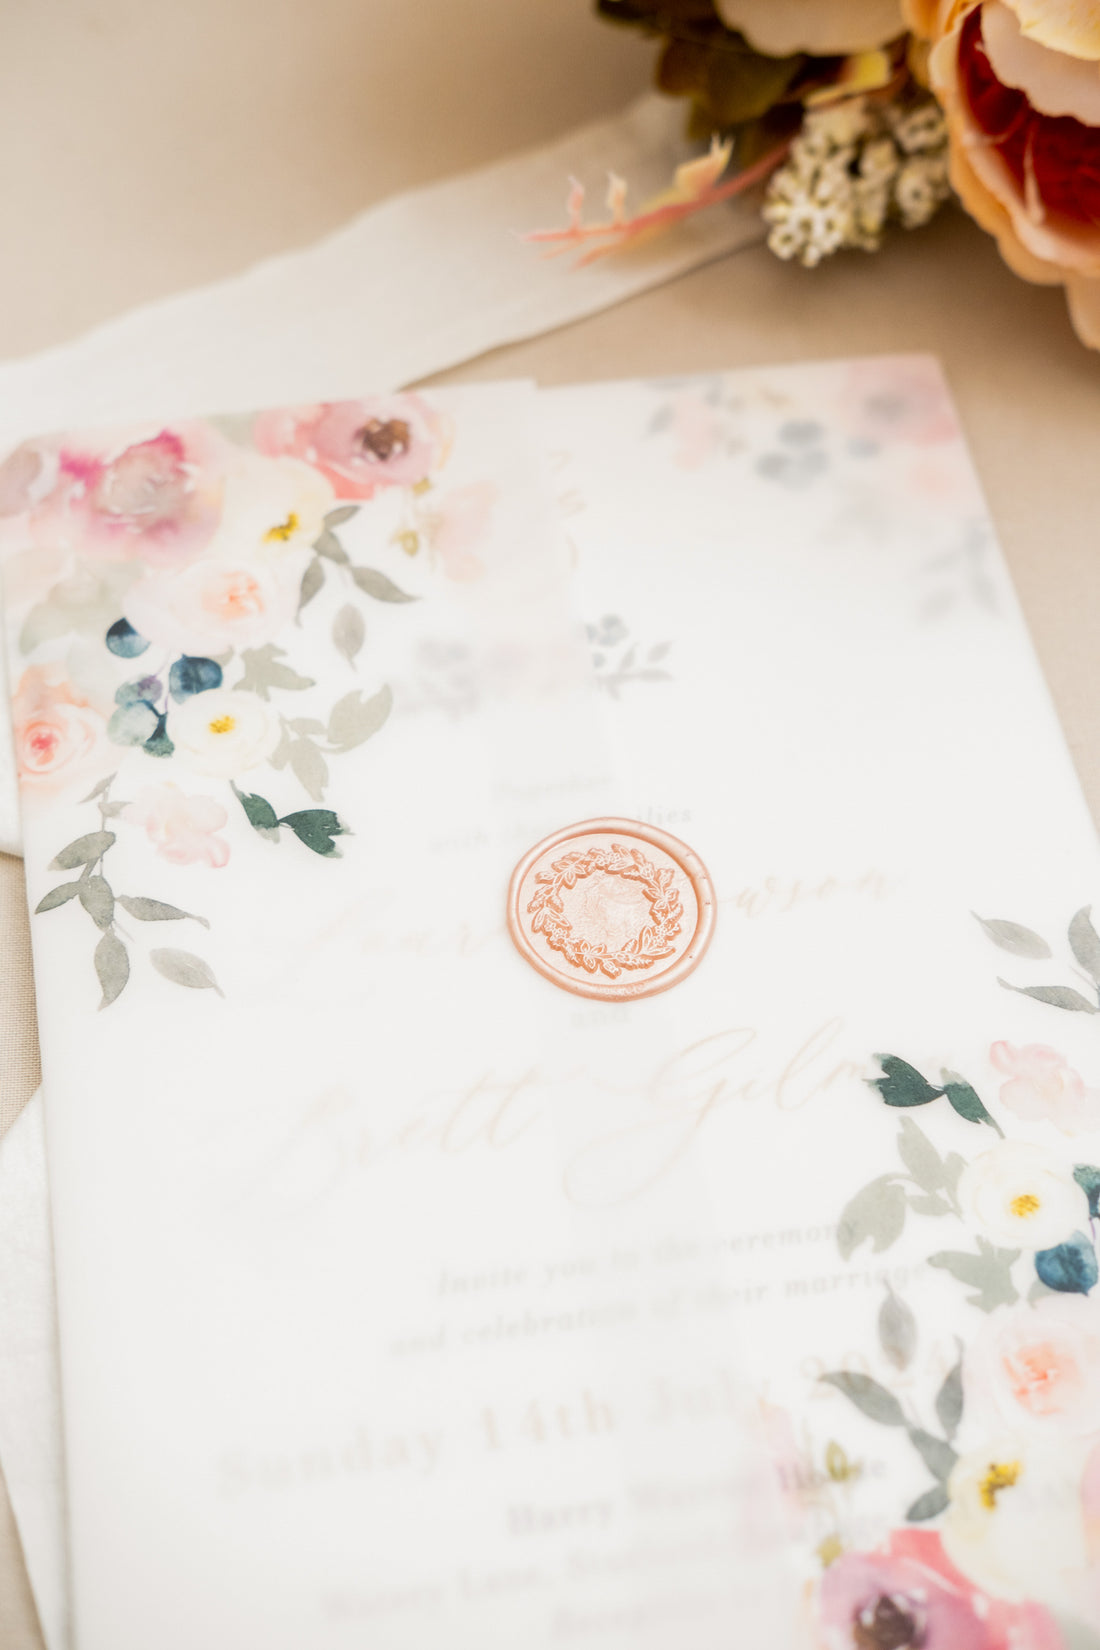 HOW TO USE VELLUM PAPER FOR WEDDING INVITATIONS